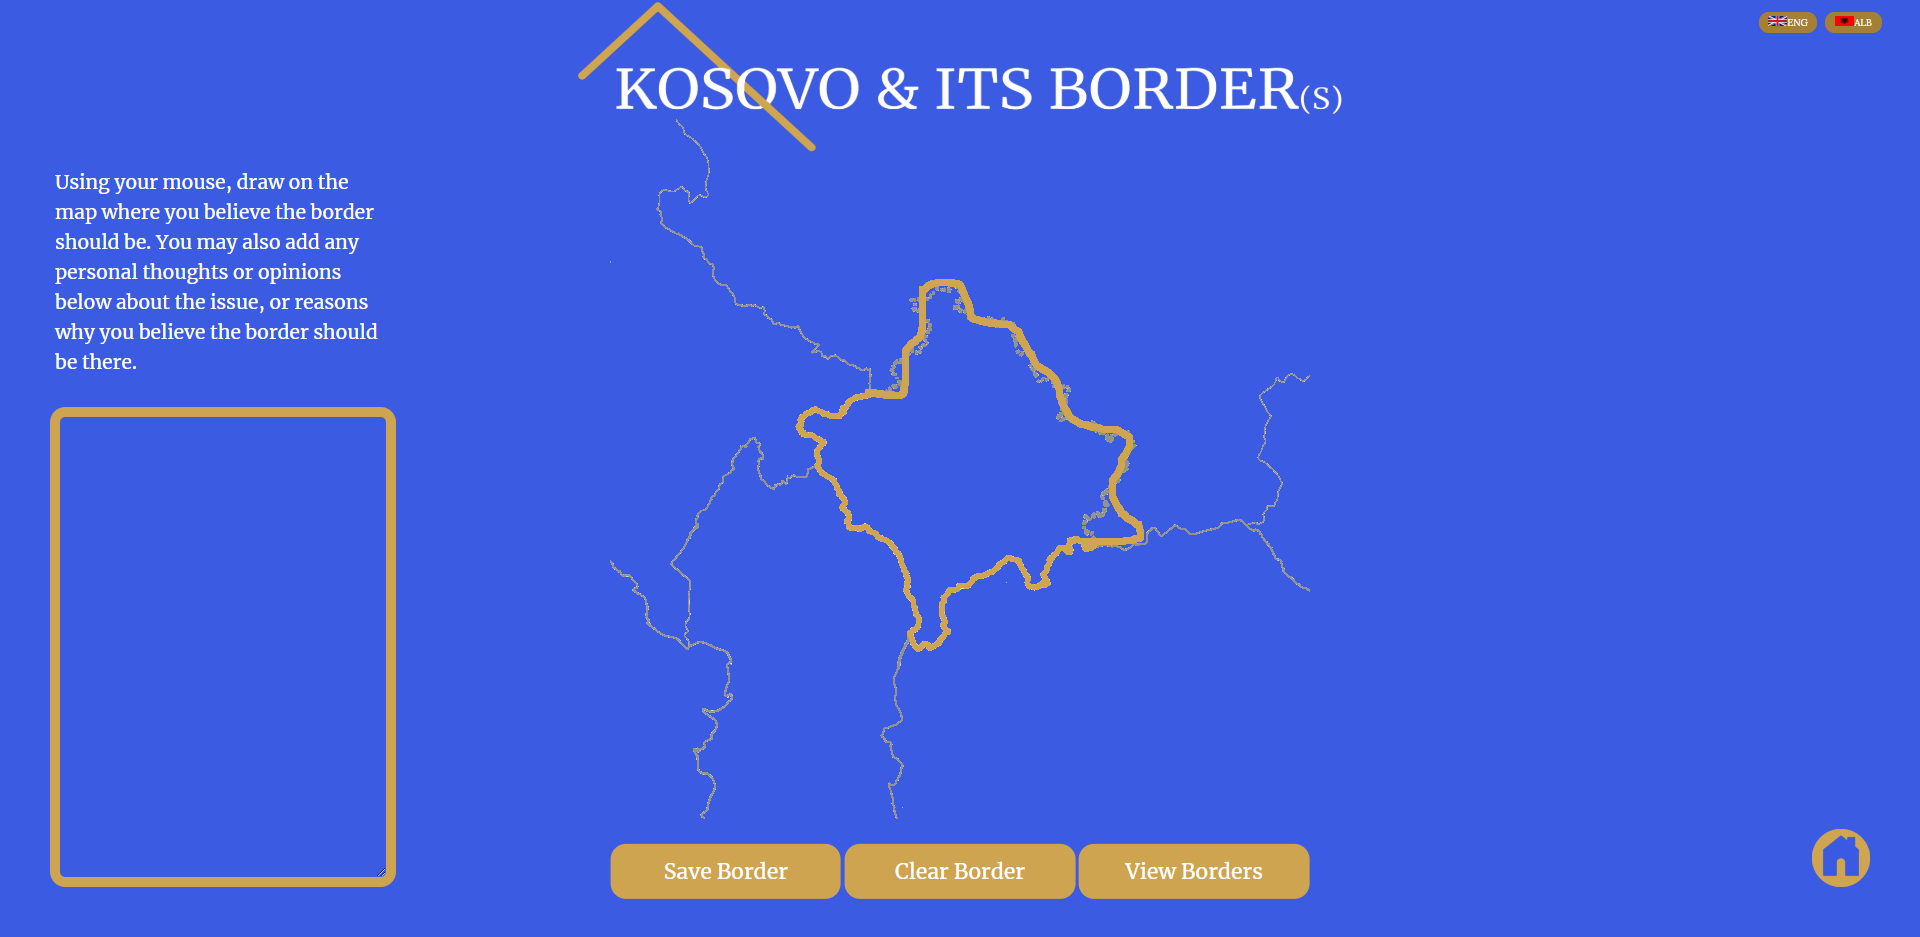 Kosovo & Its Border(s) Interface Overview